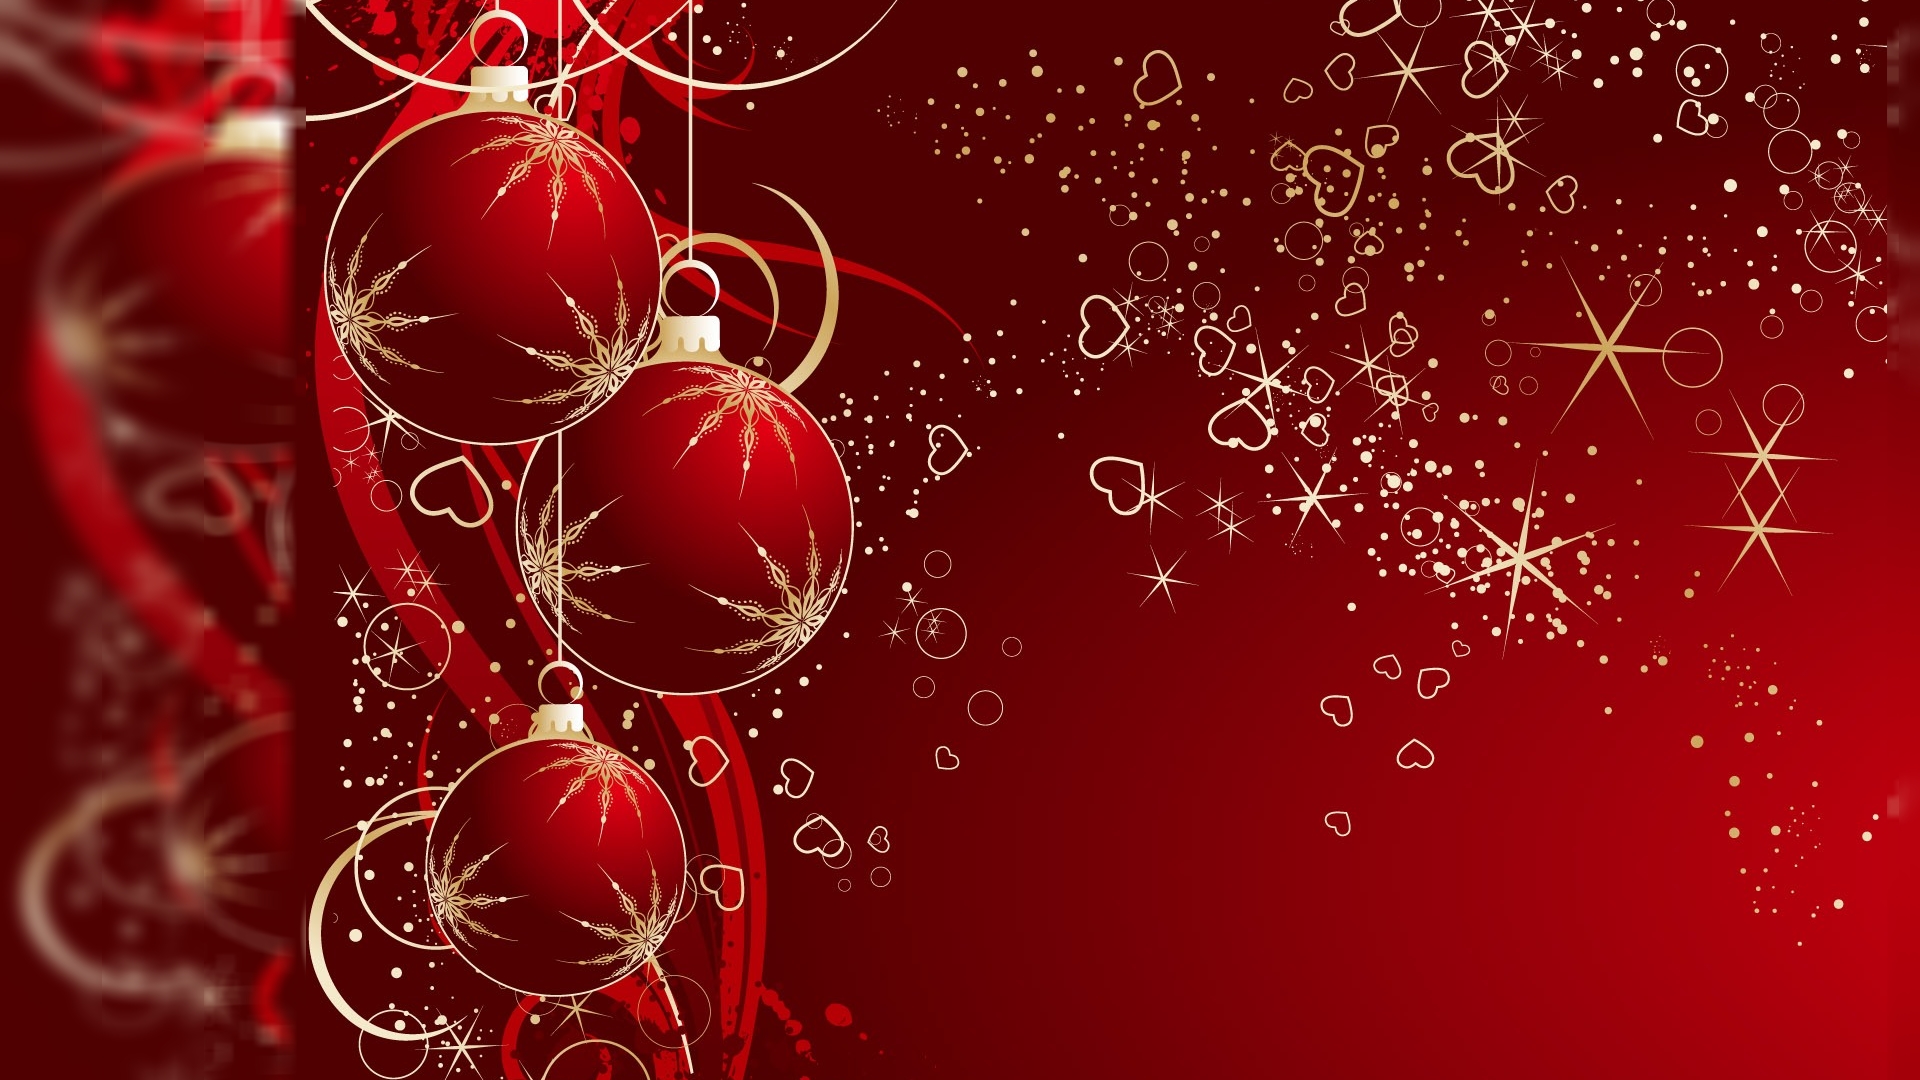 Top 10 Desktop background Christmas themes Free download for your holiday setup